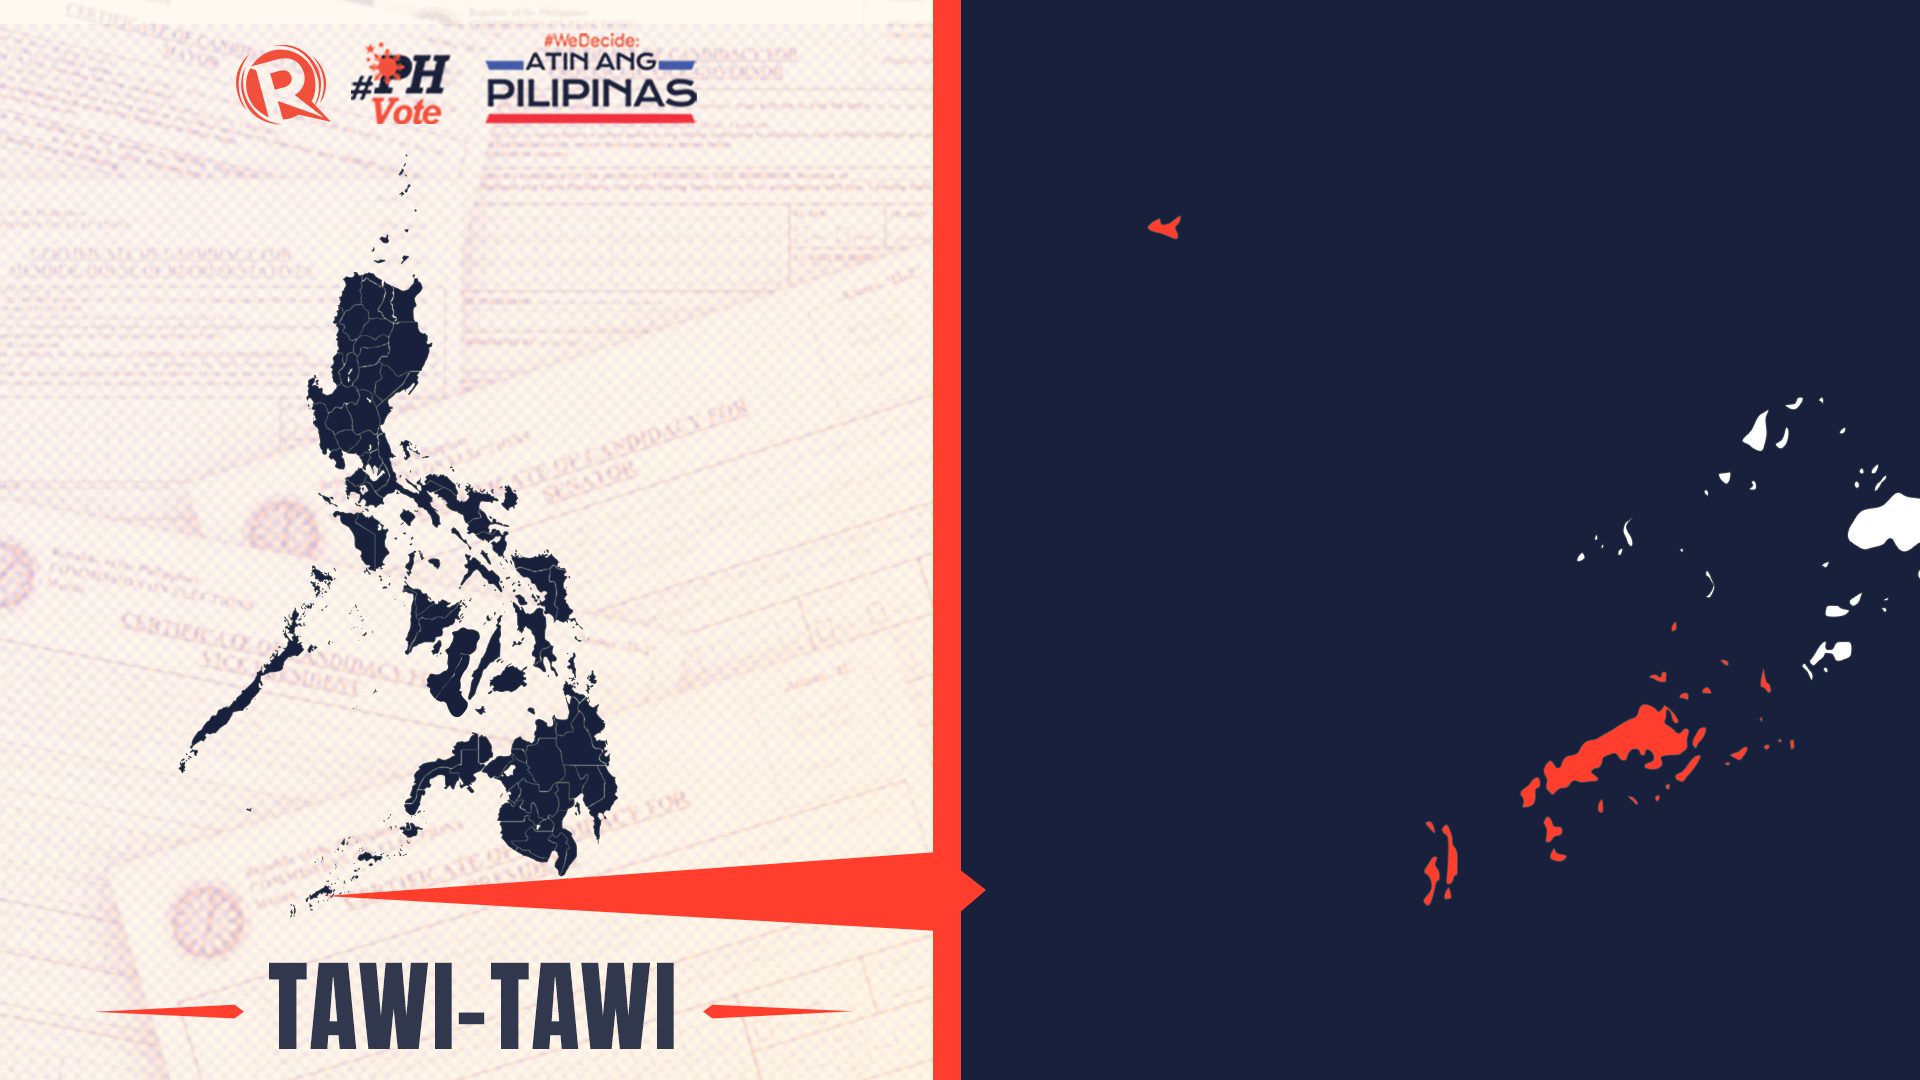 LIST: Who is running in Tawi-Tawi in the 2022 Philippine elections?